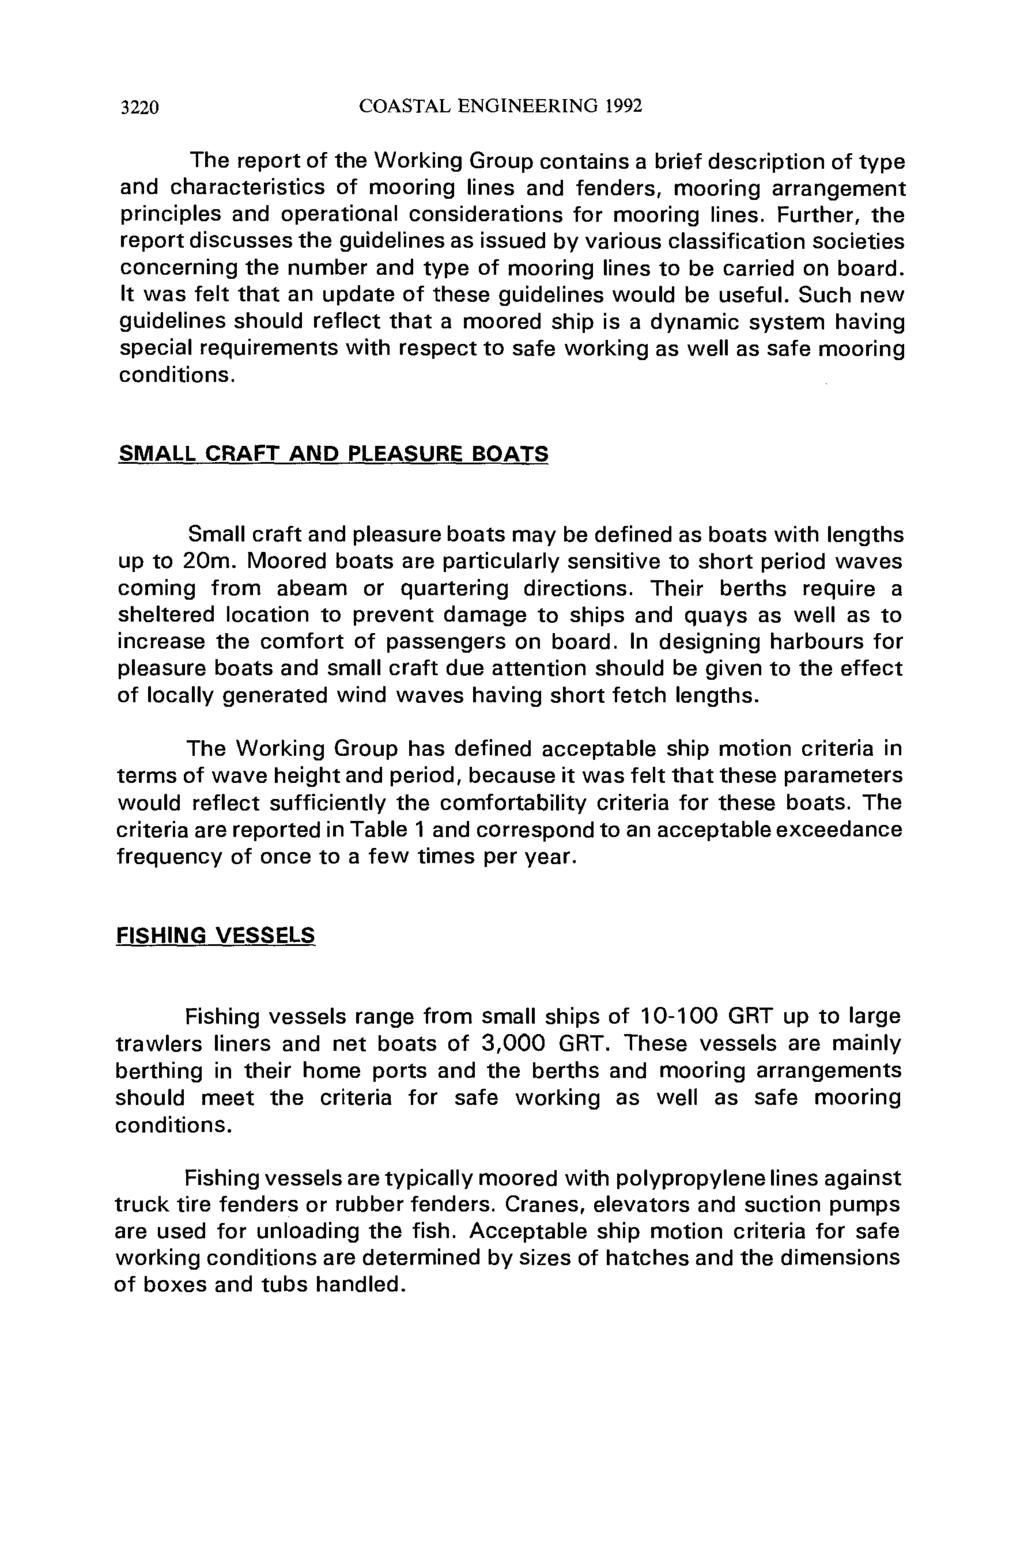 3220 COASTAL ENGINEERING 1992 The report of the Working Group contains a brief description of type and characteristics of mooring lines and fenders, mooring arrangement principles and operational